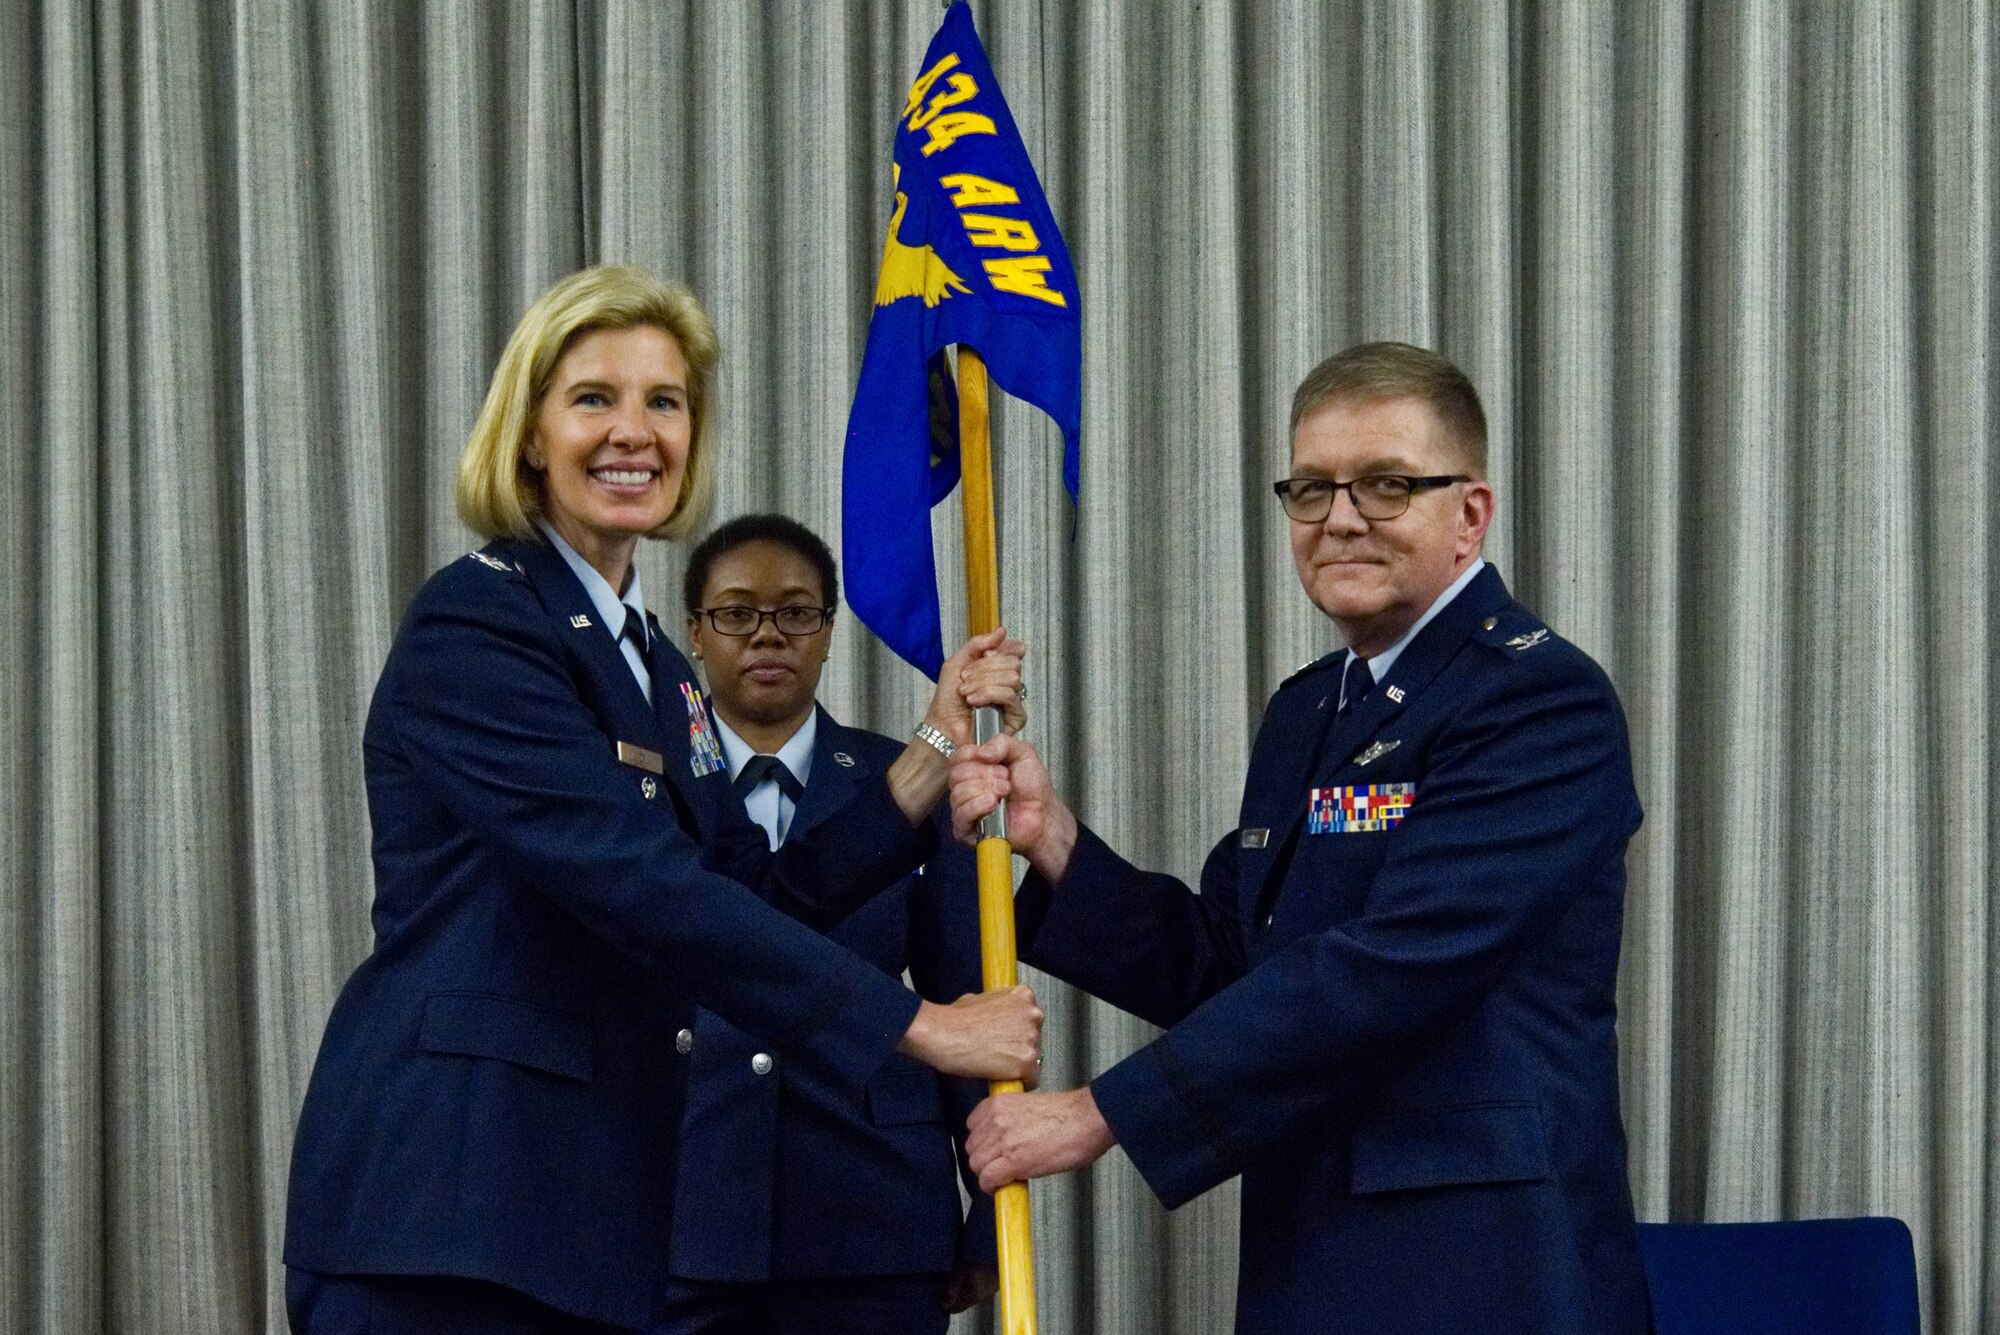 Col. Gregory Pinnell, 434th Aerospace Medicine Squadron commander, accepts the guidon from Col. Anne Noel, 434th Air Refueling Wing vice commander, at a change of command ceremony at Grissom Air Reserve Base, Indiana, June 1, 2019. Pinnell is filling the position left by the previous AMDS commander, Lt. Col. Pete Weber. (U.S. Air Force photo / Airman 1st Class Harrison Withrow)